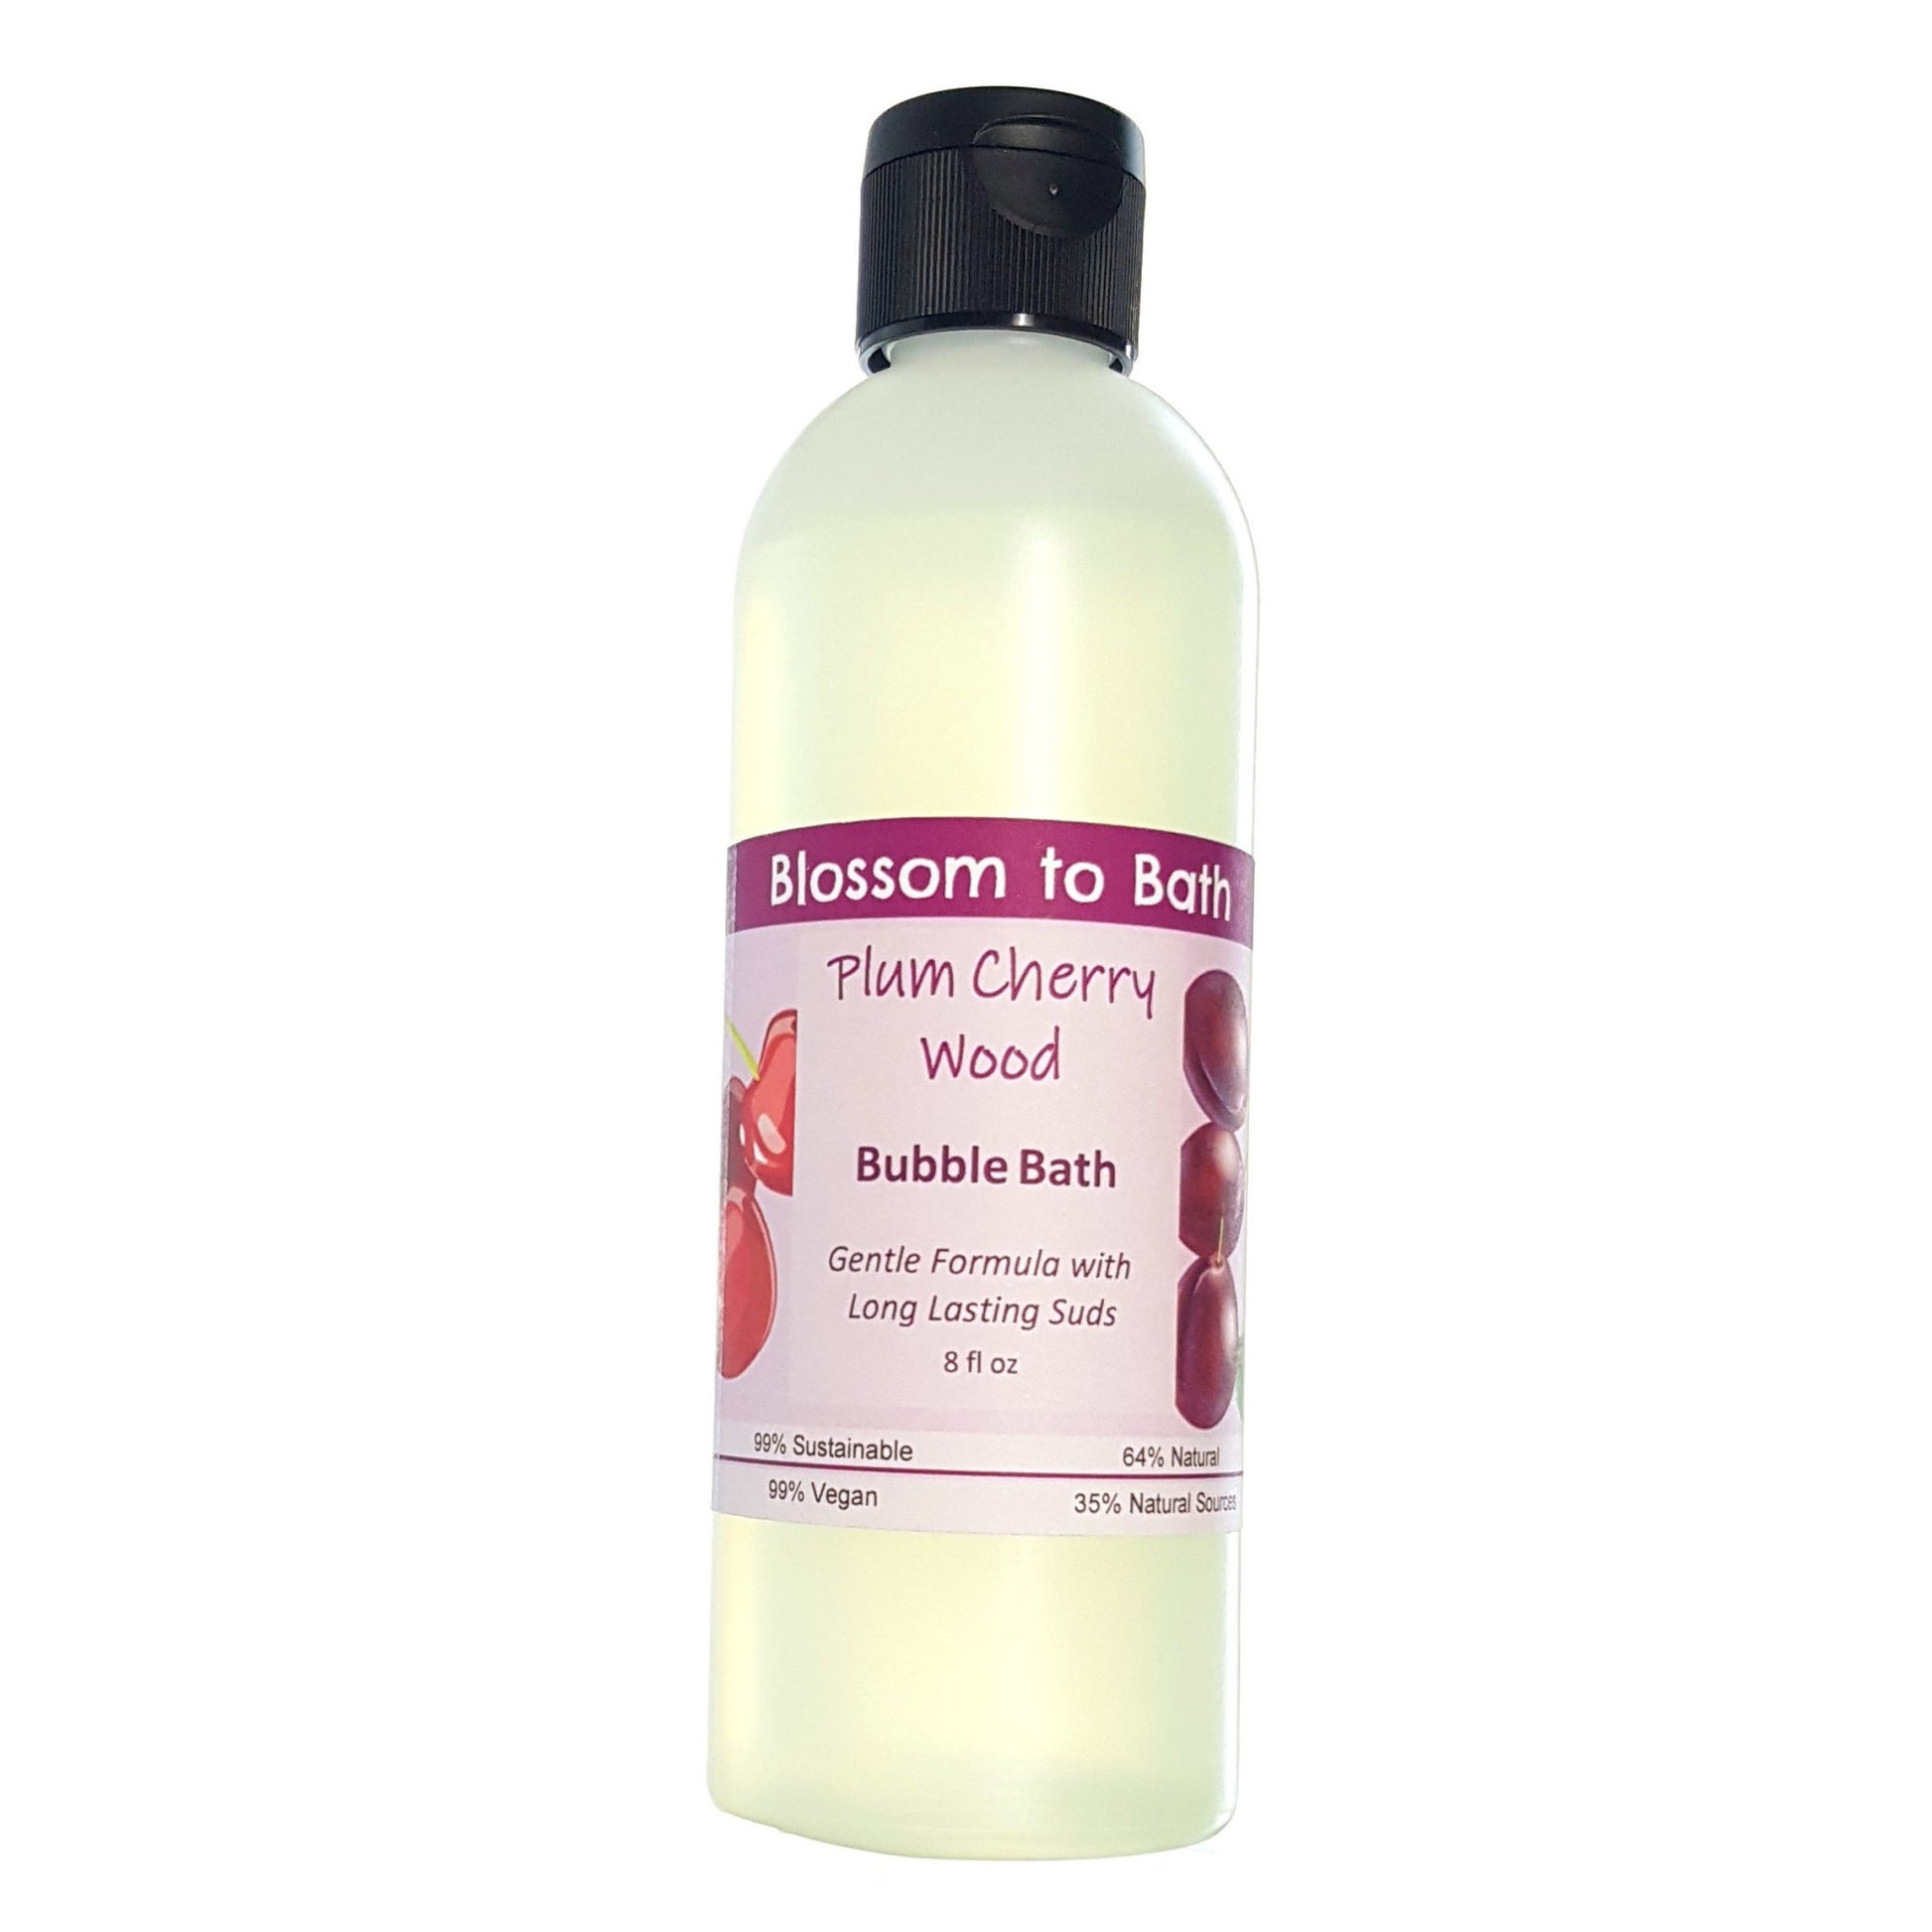 Buy Blossom to Bath Plum Cherry Wood Bubble Bath from Flowersong Soap Studio.  Lively, long lasting  bubbles in a gentle plant based formula for maximum relaxation time  A charmingly sweet and woodsy fragrance.